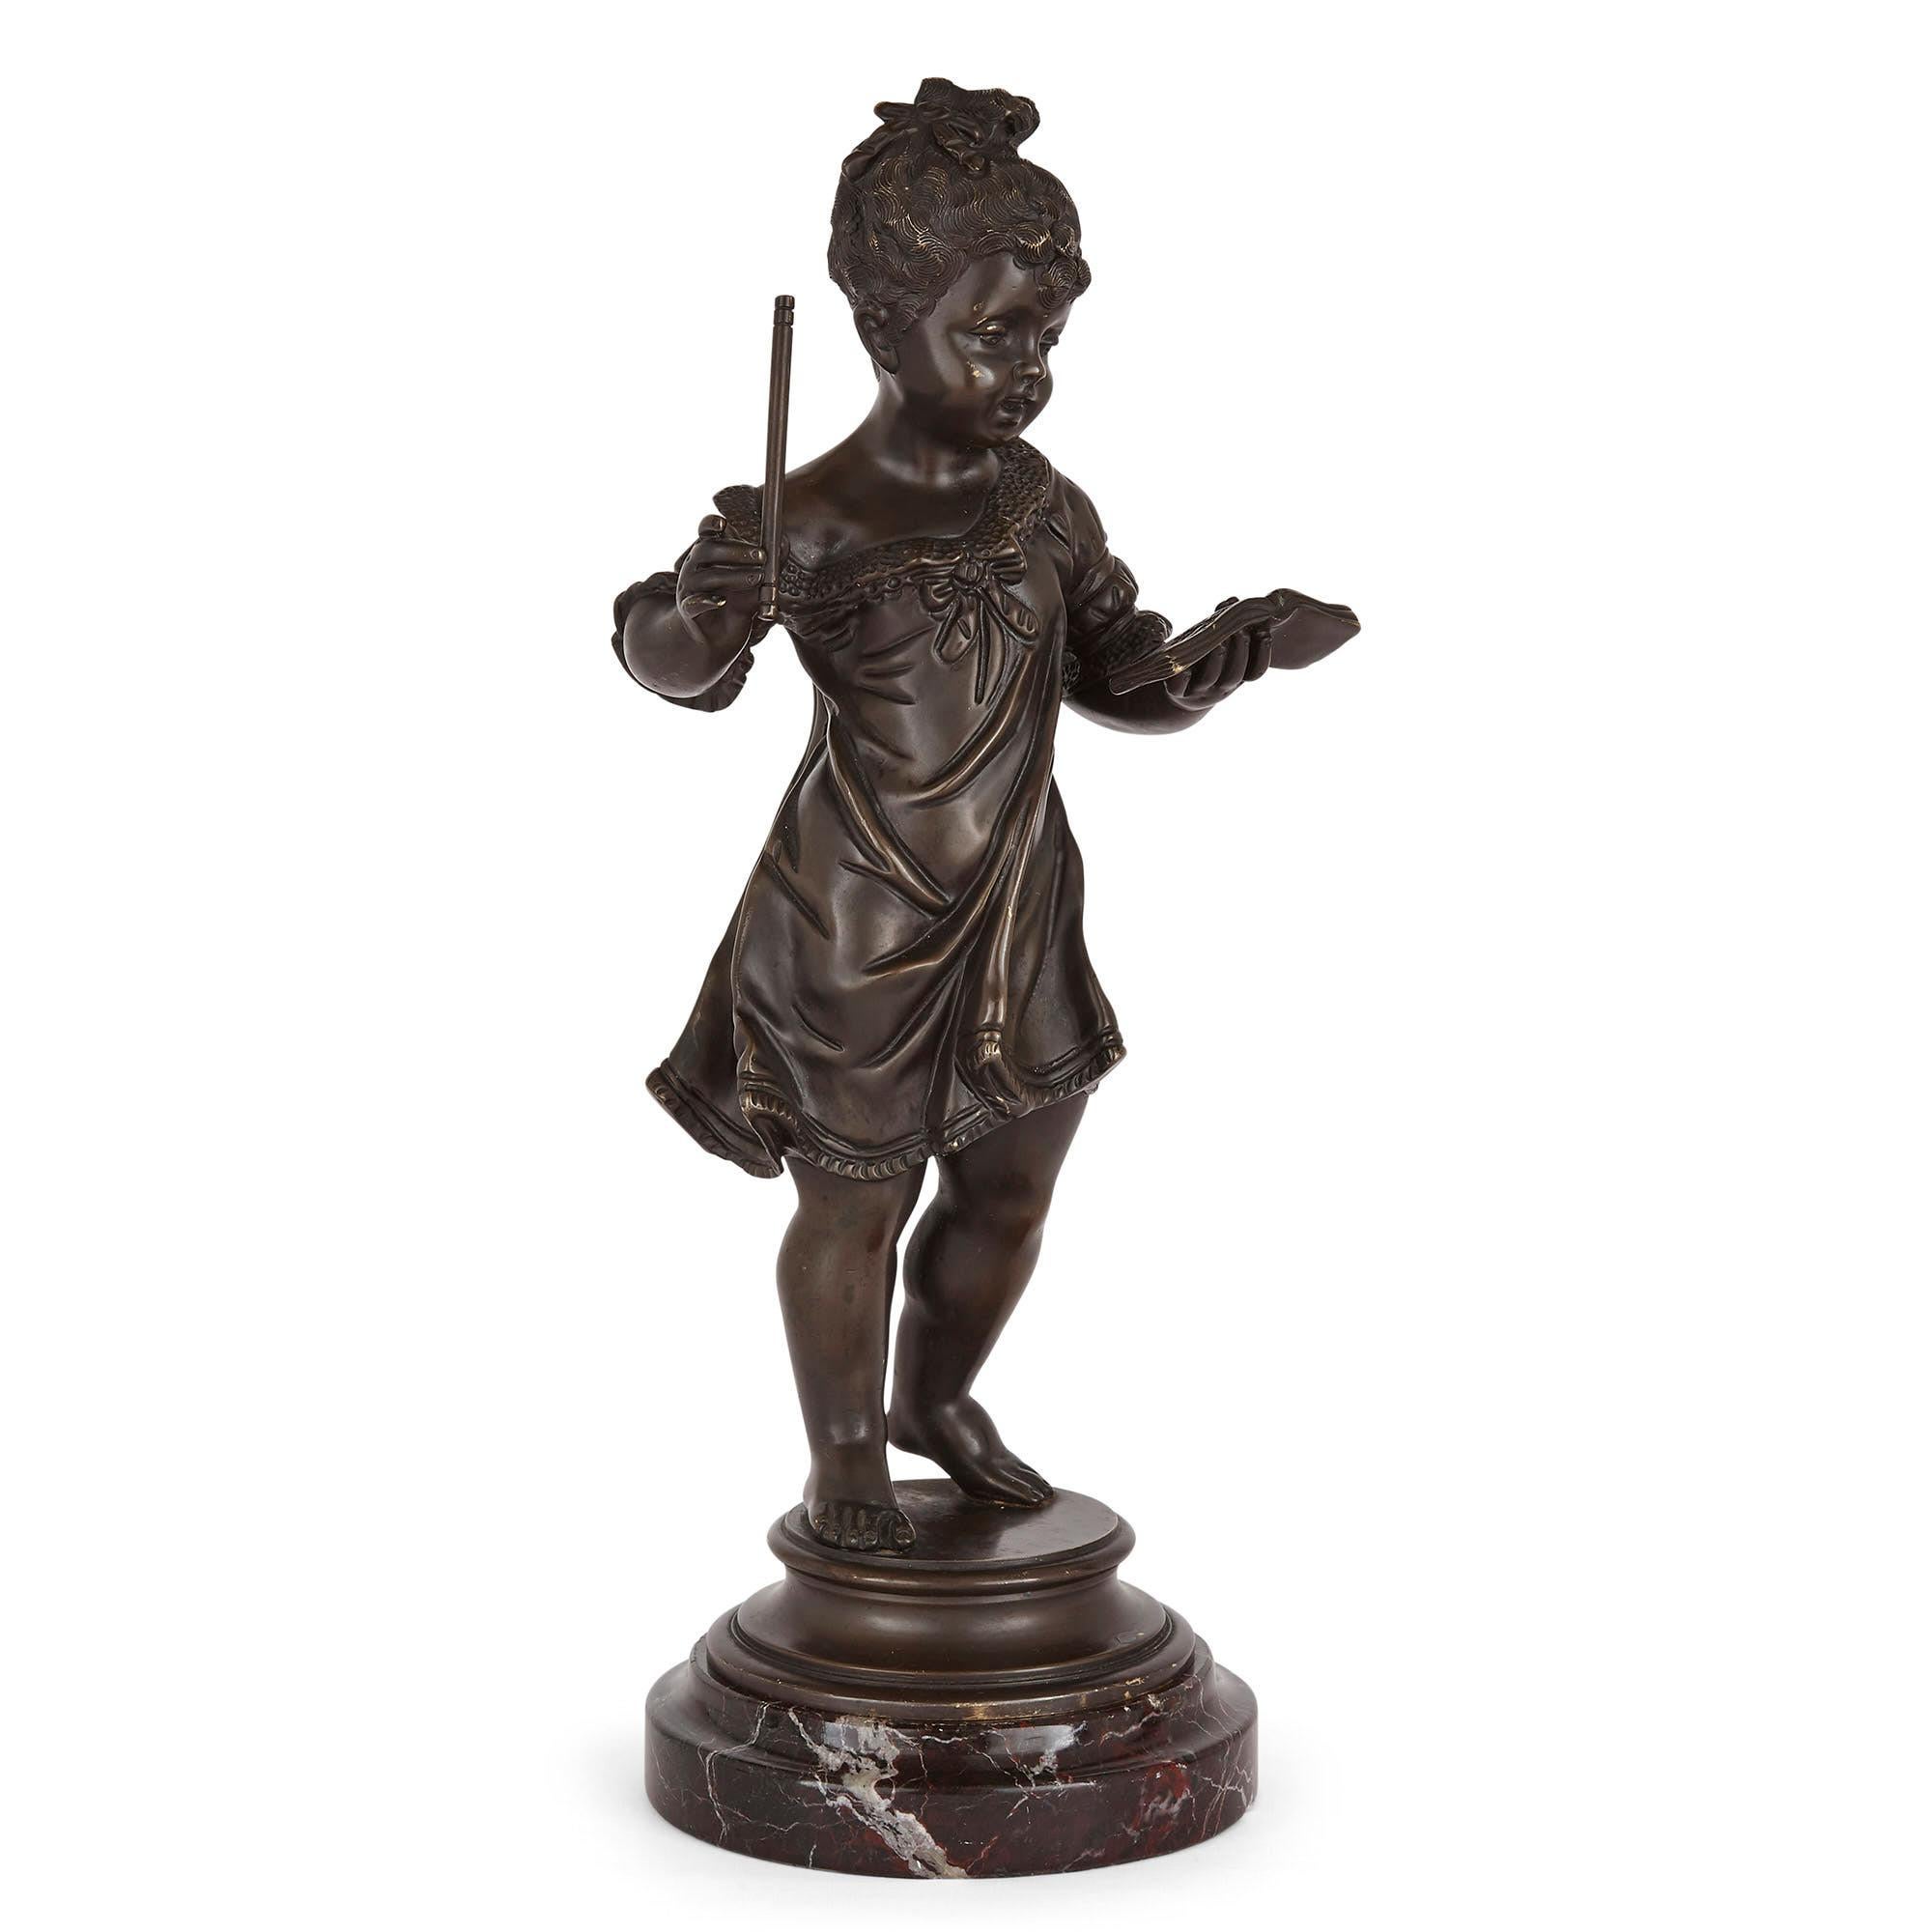 Pair of bronze figures of children playing music by Rousseau
Belgian, early 20th century
Boy with flute: Height 39cm, width 20cm, depth 15cm
Girl with book: Height 40cm, width 17cm, depth 15cm

This pair of patinated bronze sculptures portray a